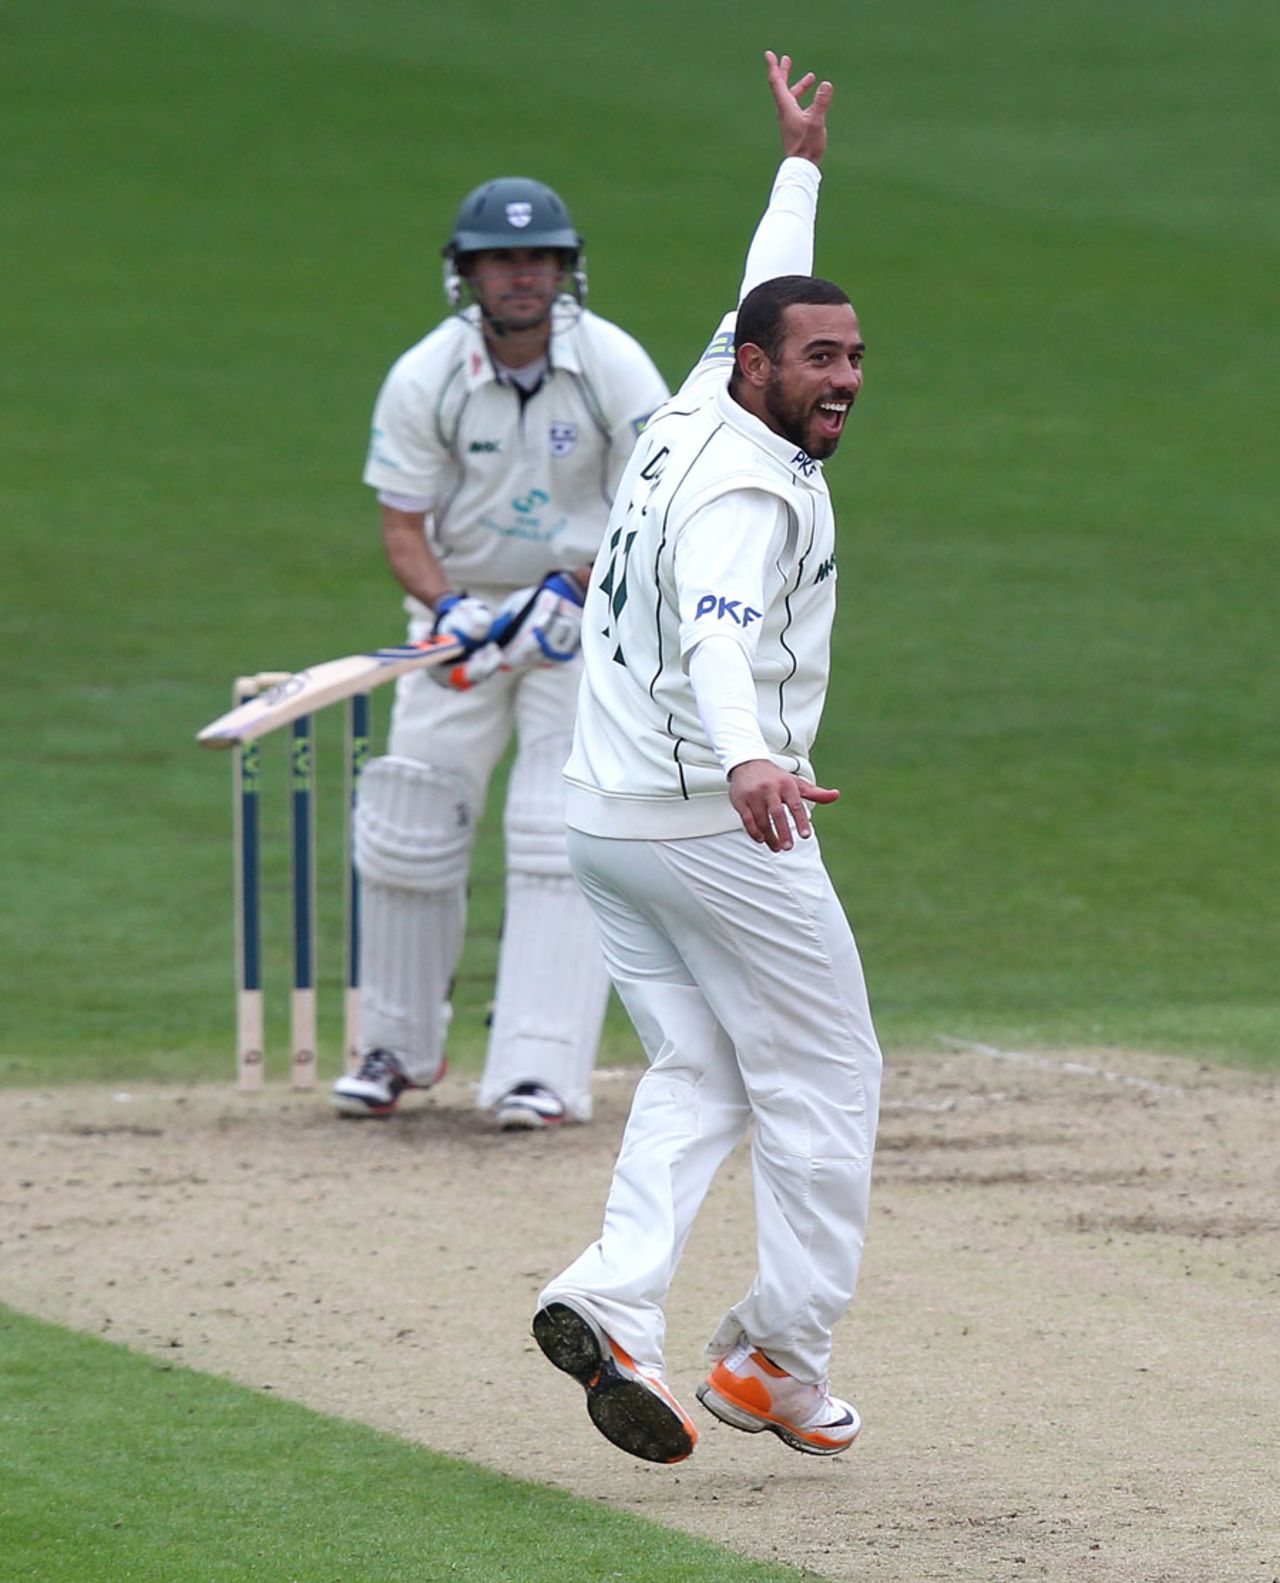 Andre Adams successfully appeals for the wicket of Daryl Mitchell, Worcestershire v Nottinghamshire, County Championship, Division One, New Road, 2nd day, April 27, 2012